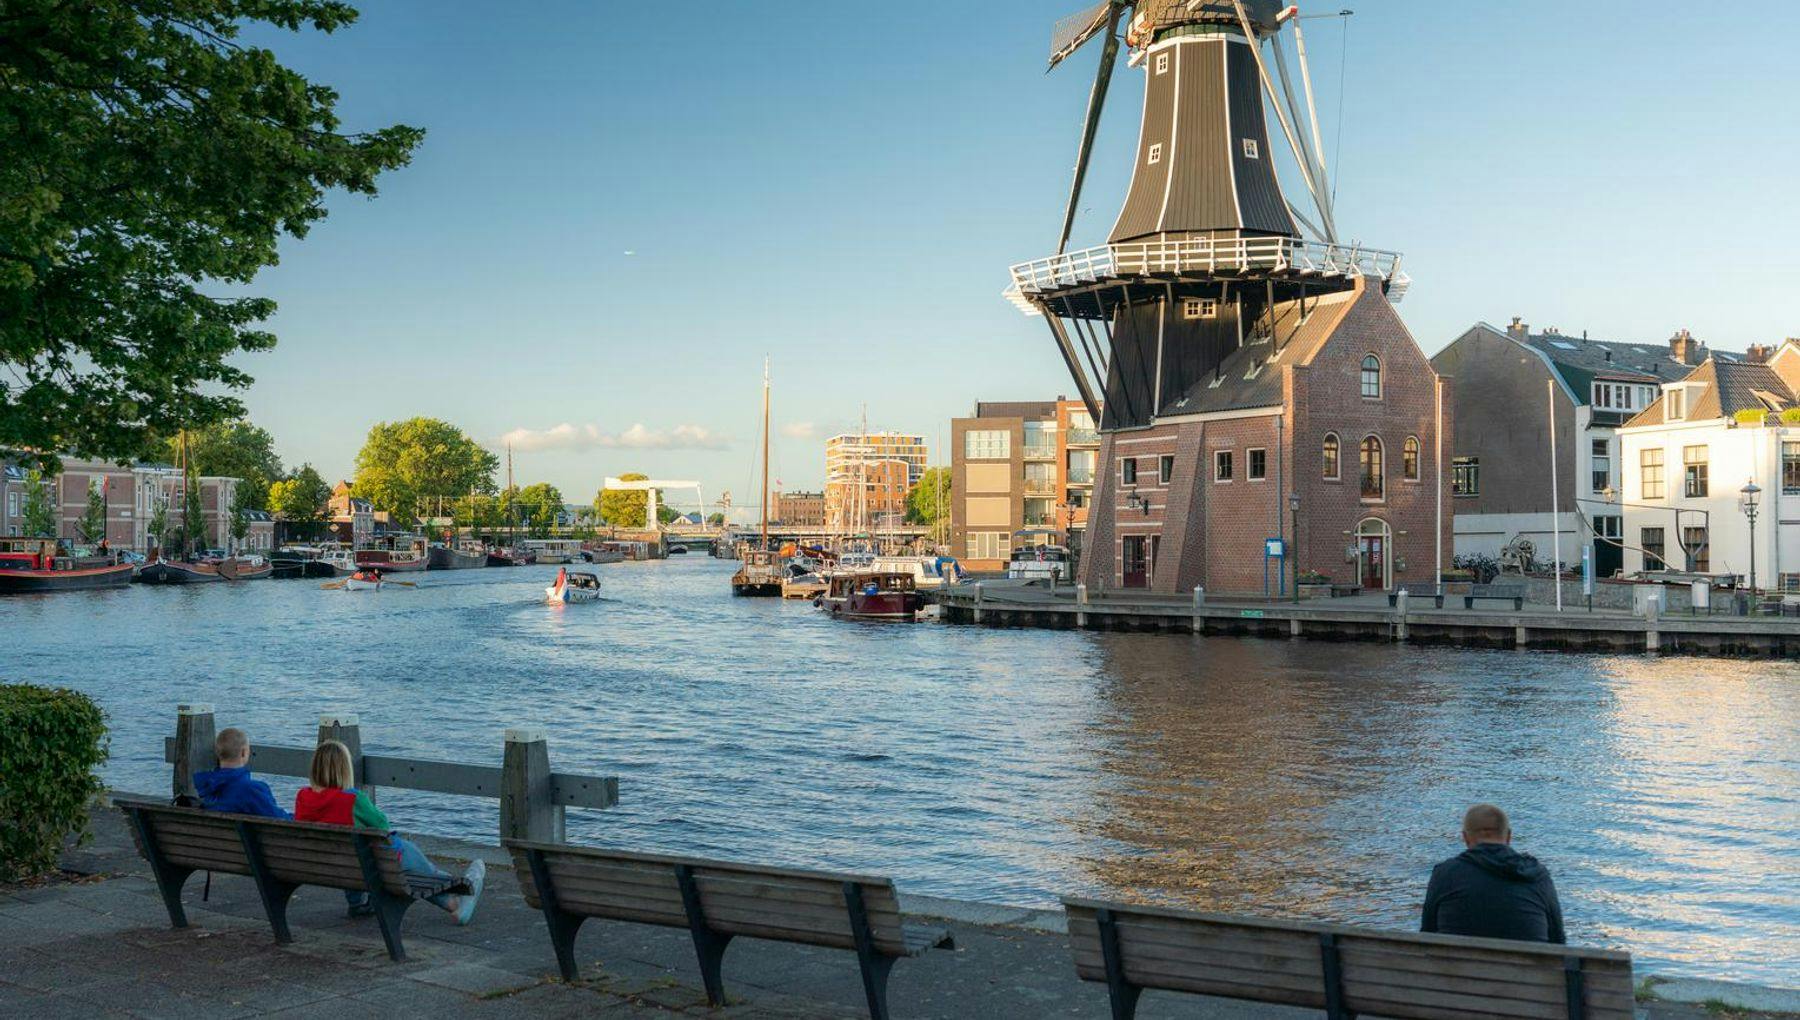 People sitting on benches enjoying their view at the Spaarne river in Haarlem. On the other side of the water, you see the Molen De Adriaan windmill.